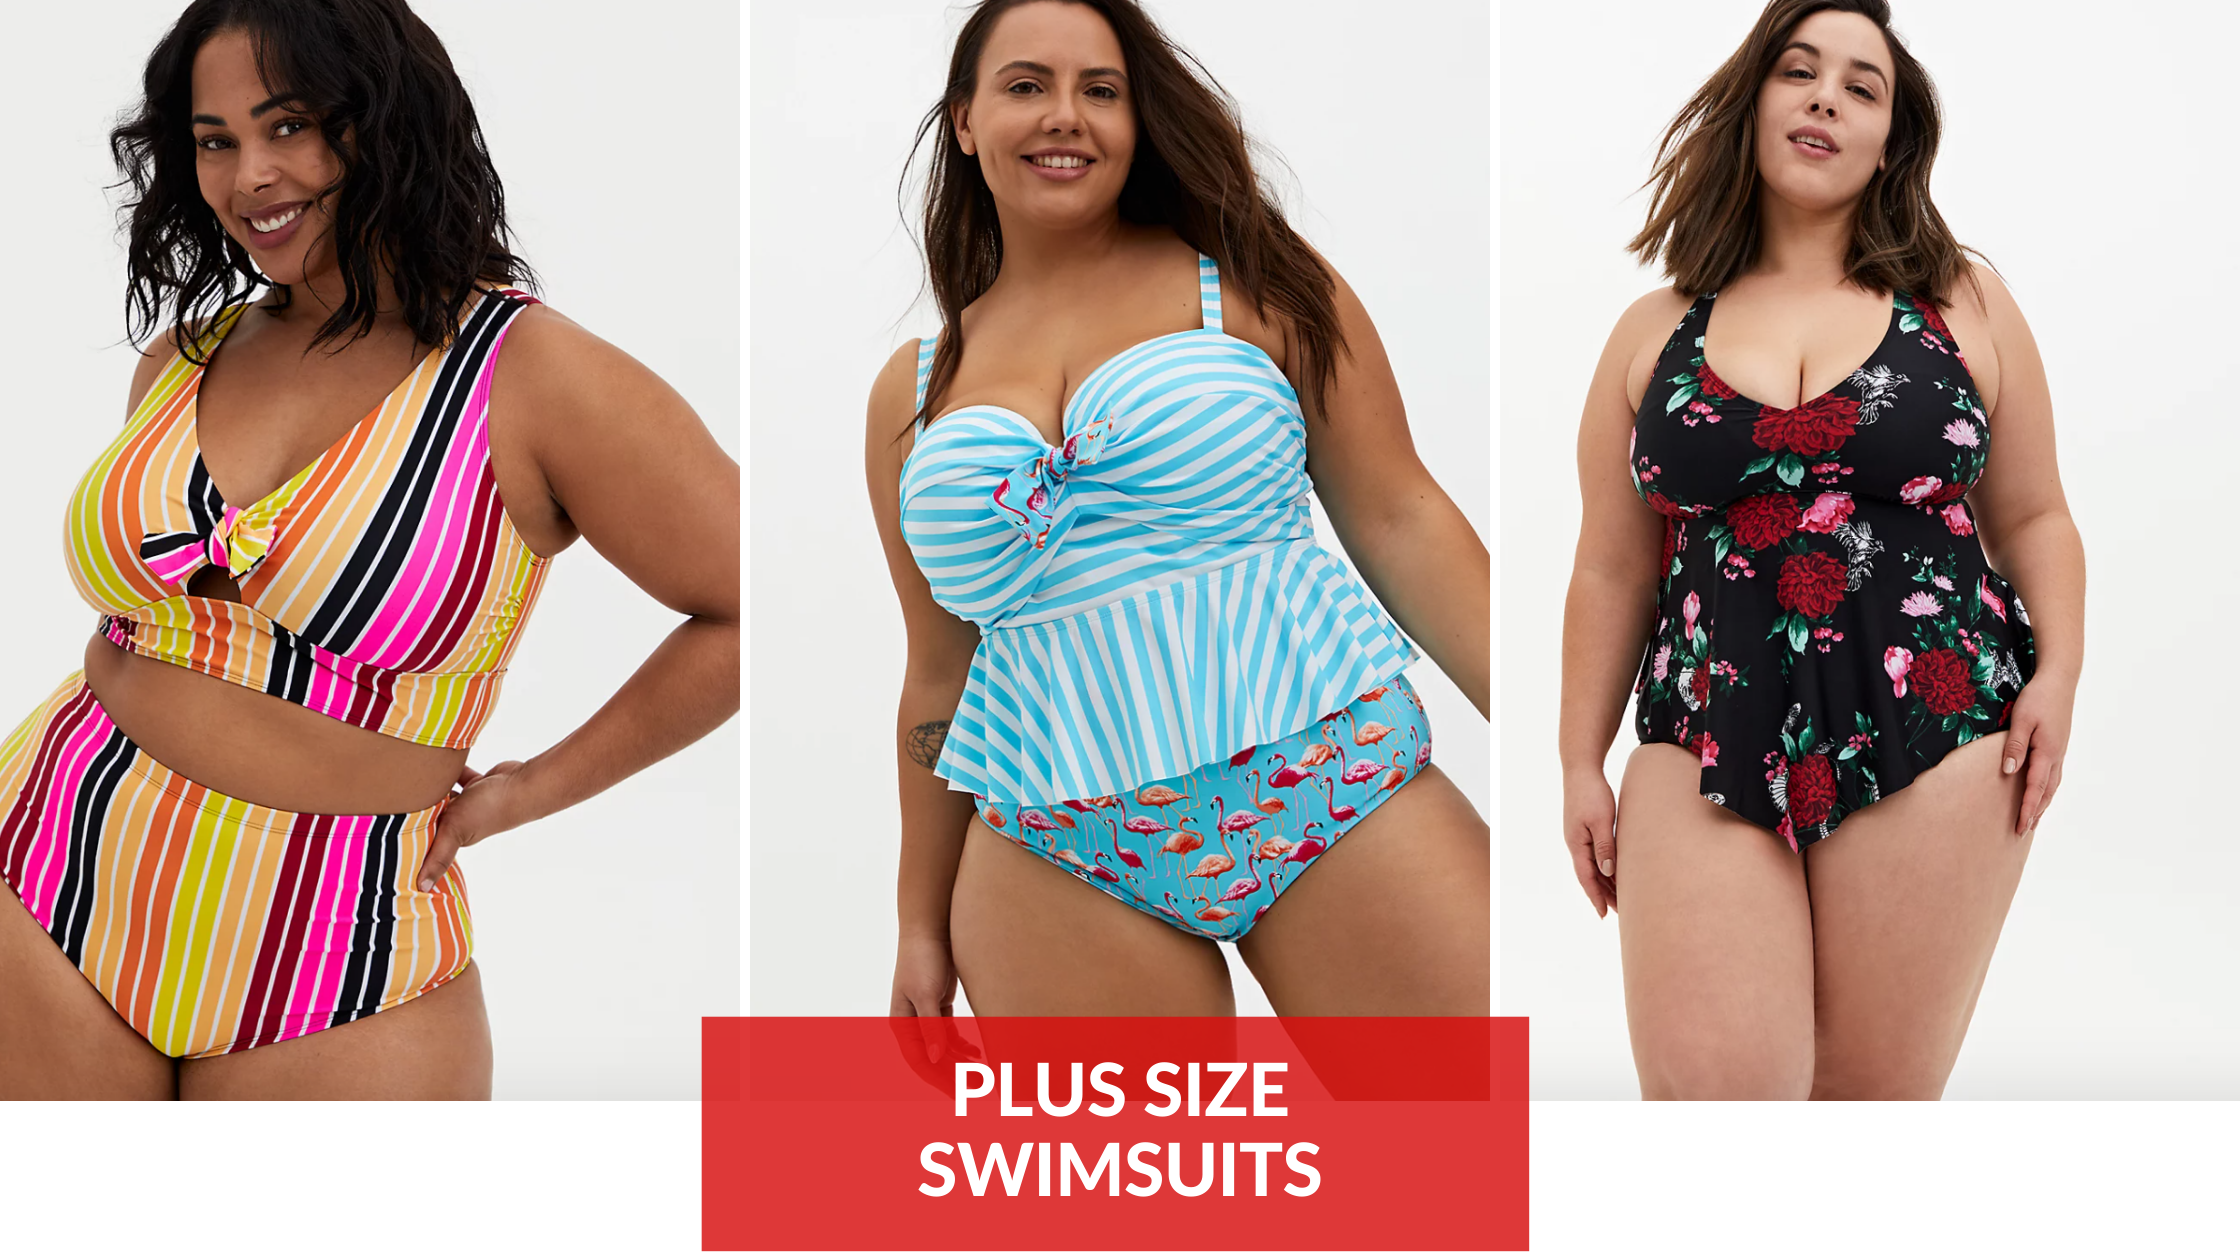 People: The 20 Best Places to Buy Plus Size Swimsuits Online – Superfit Hero